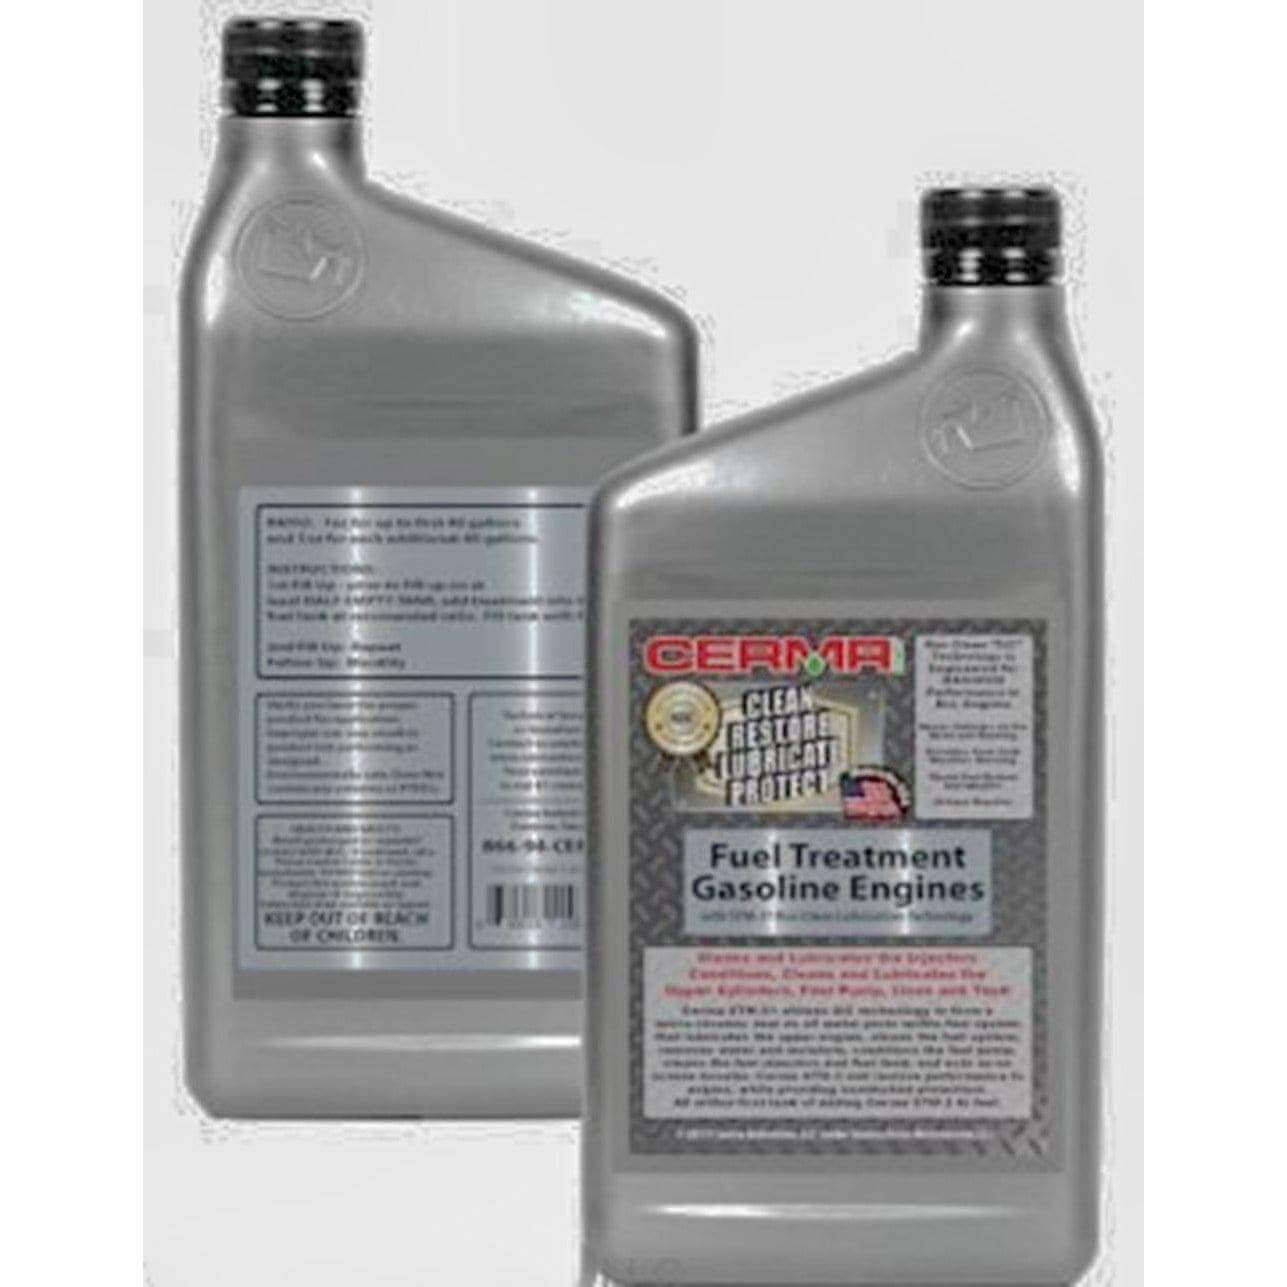 Cerma Ceramic Fuel Treatment for Gasoline Engines at $126.56 only from cermatreatment.com